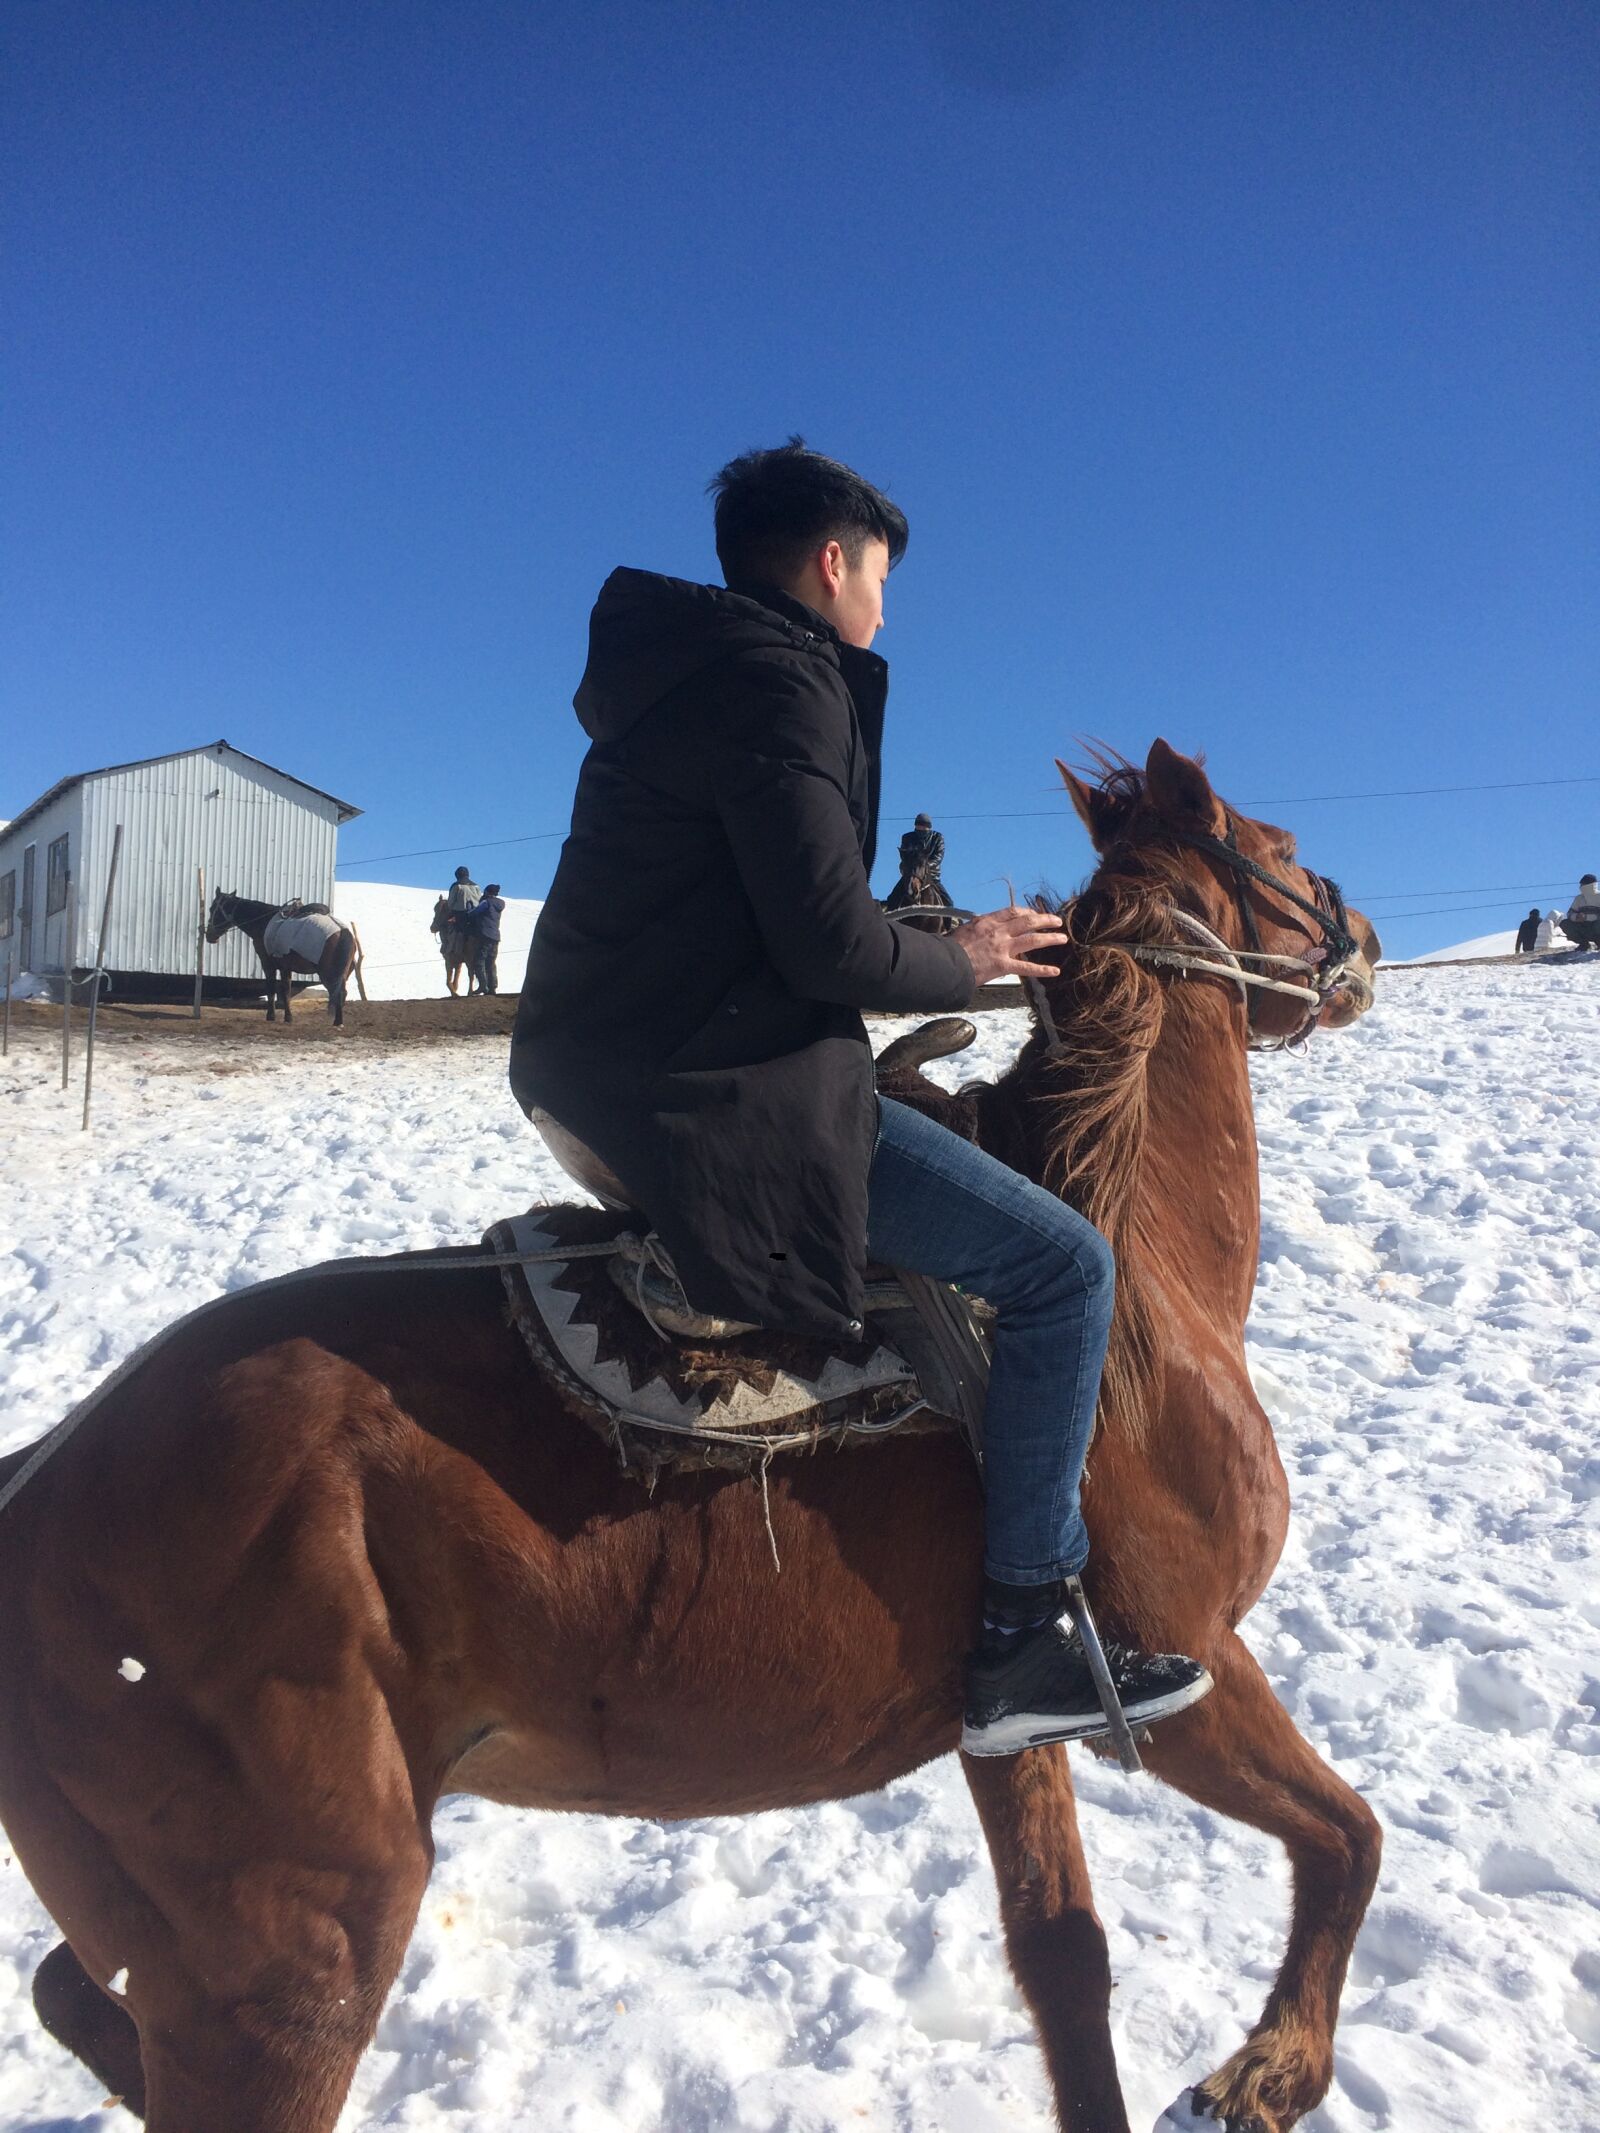 iPhone 5s back camera 4.15mm f/2.2 sample photo. Kyrgyzstan, winter, horse photography